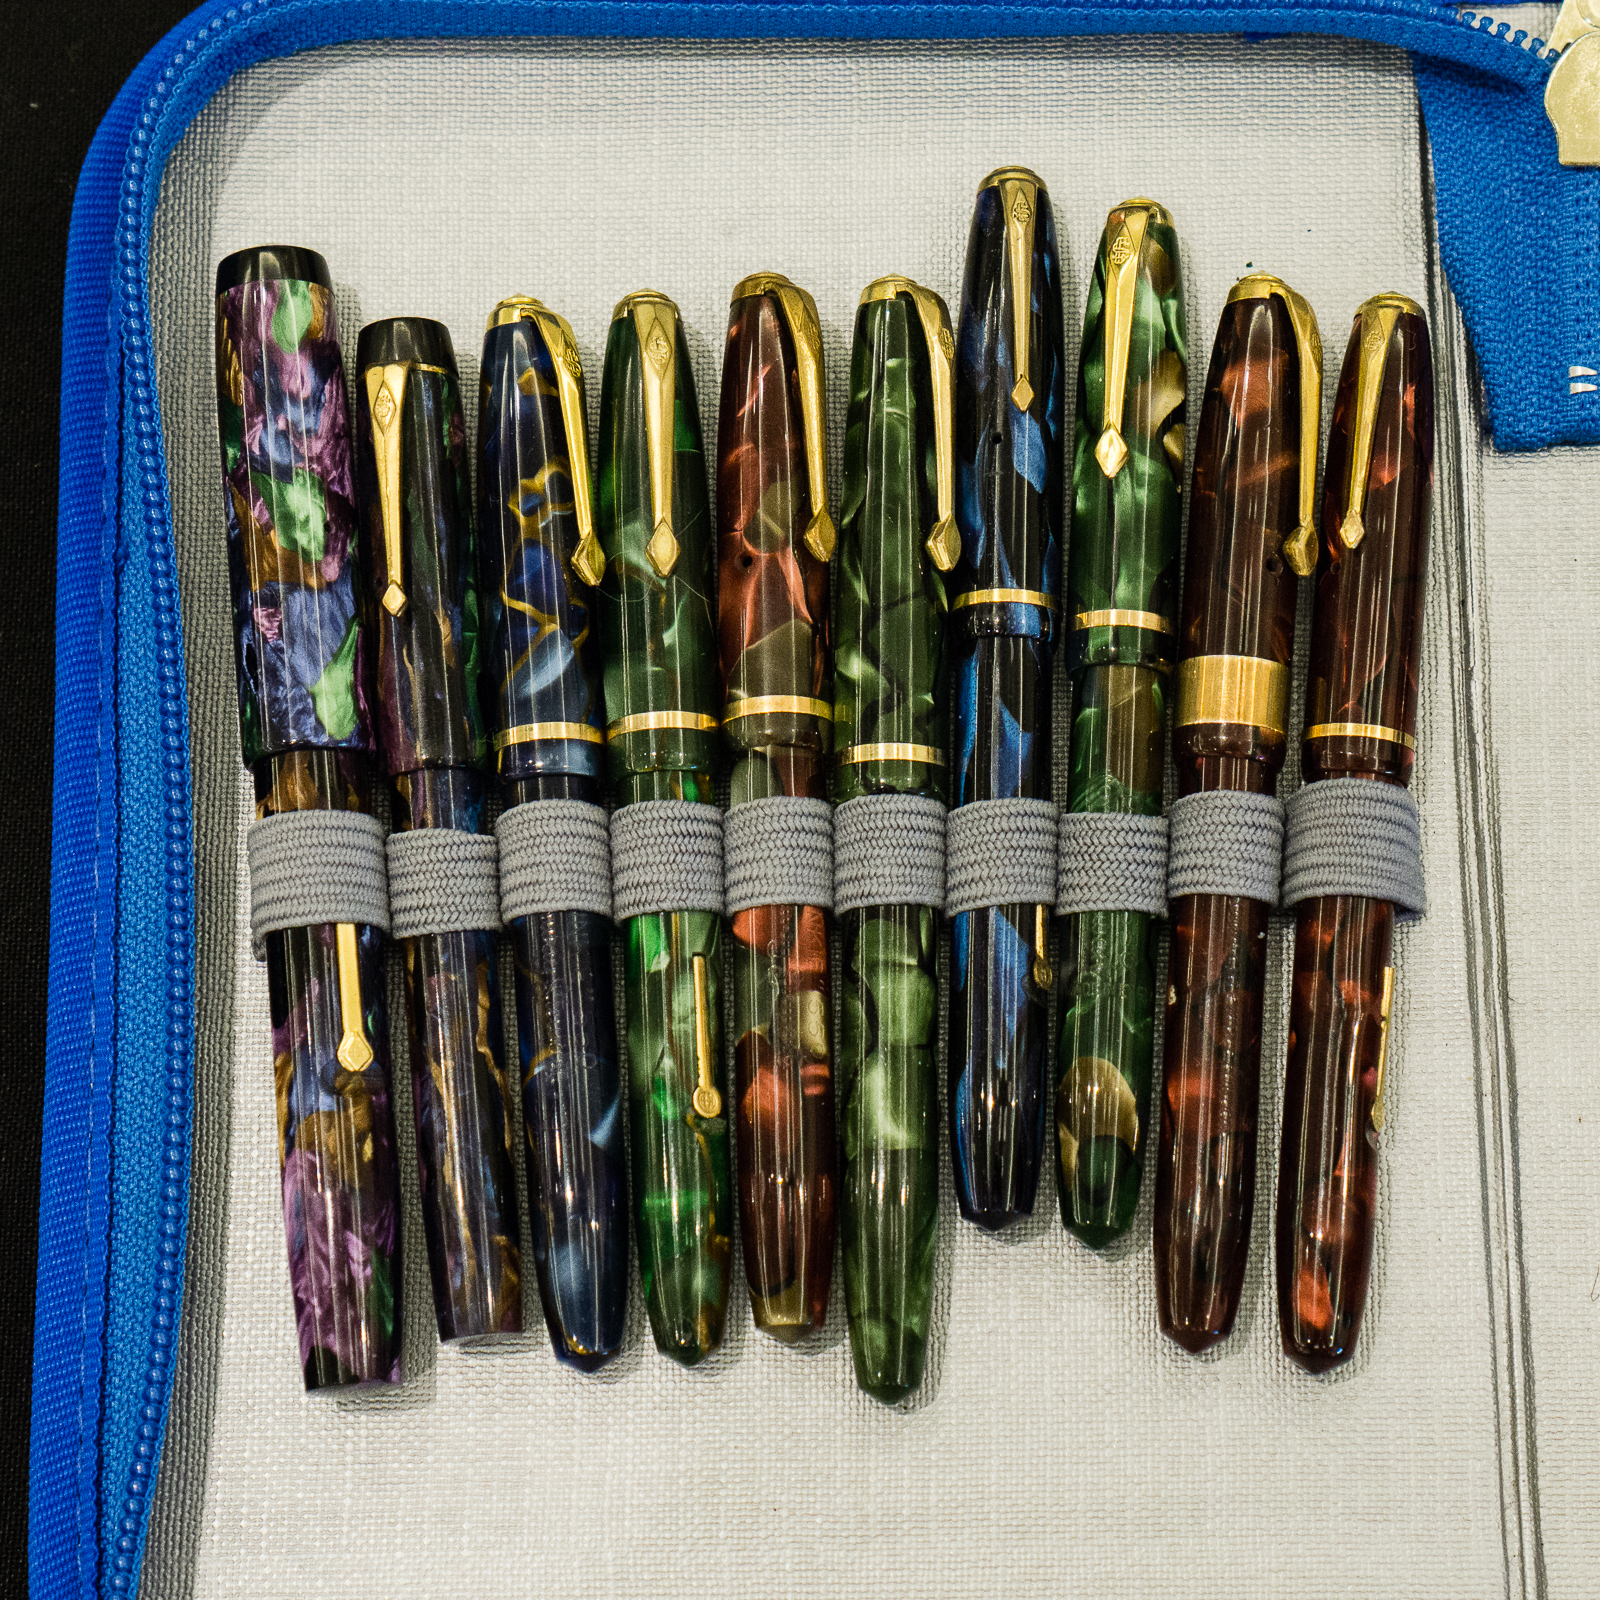 Never thought a brown pen would excite me this much. Strangely powerful  hobby this is. ❤️ : r/fountainpens